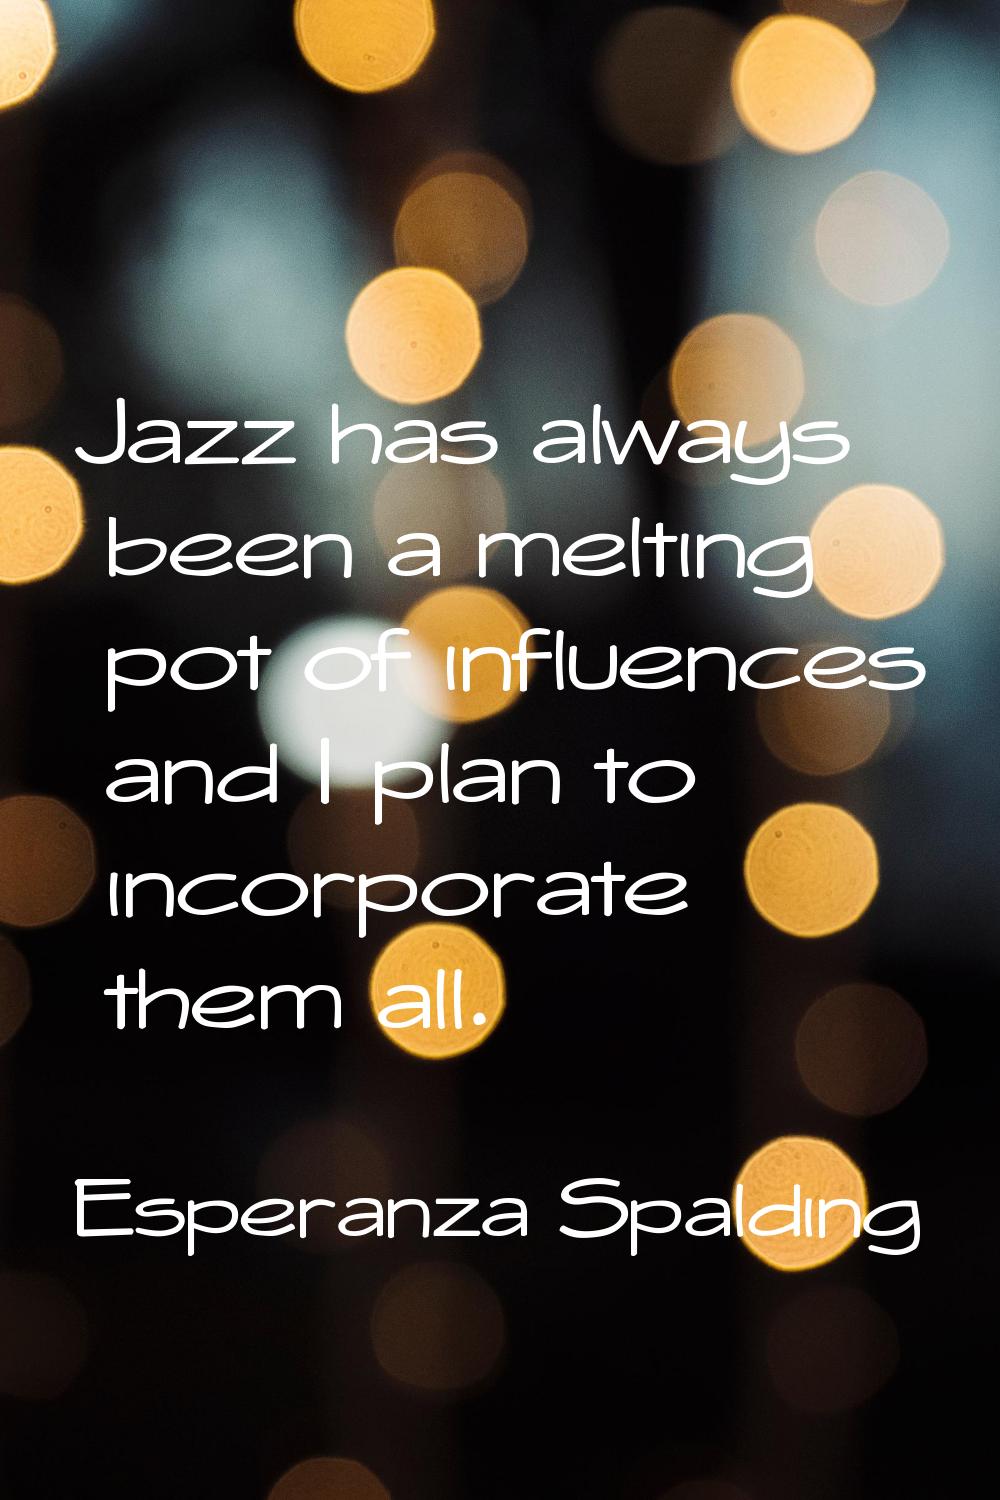 Jazz has always been a melting pot of influences and I plan to incorporate them all.